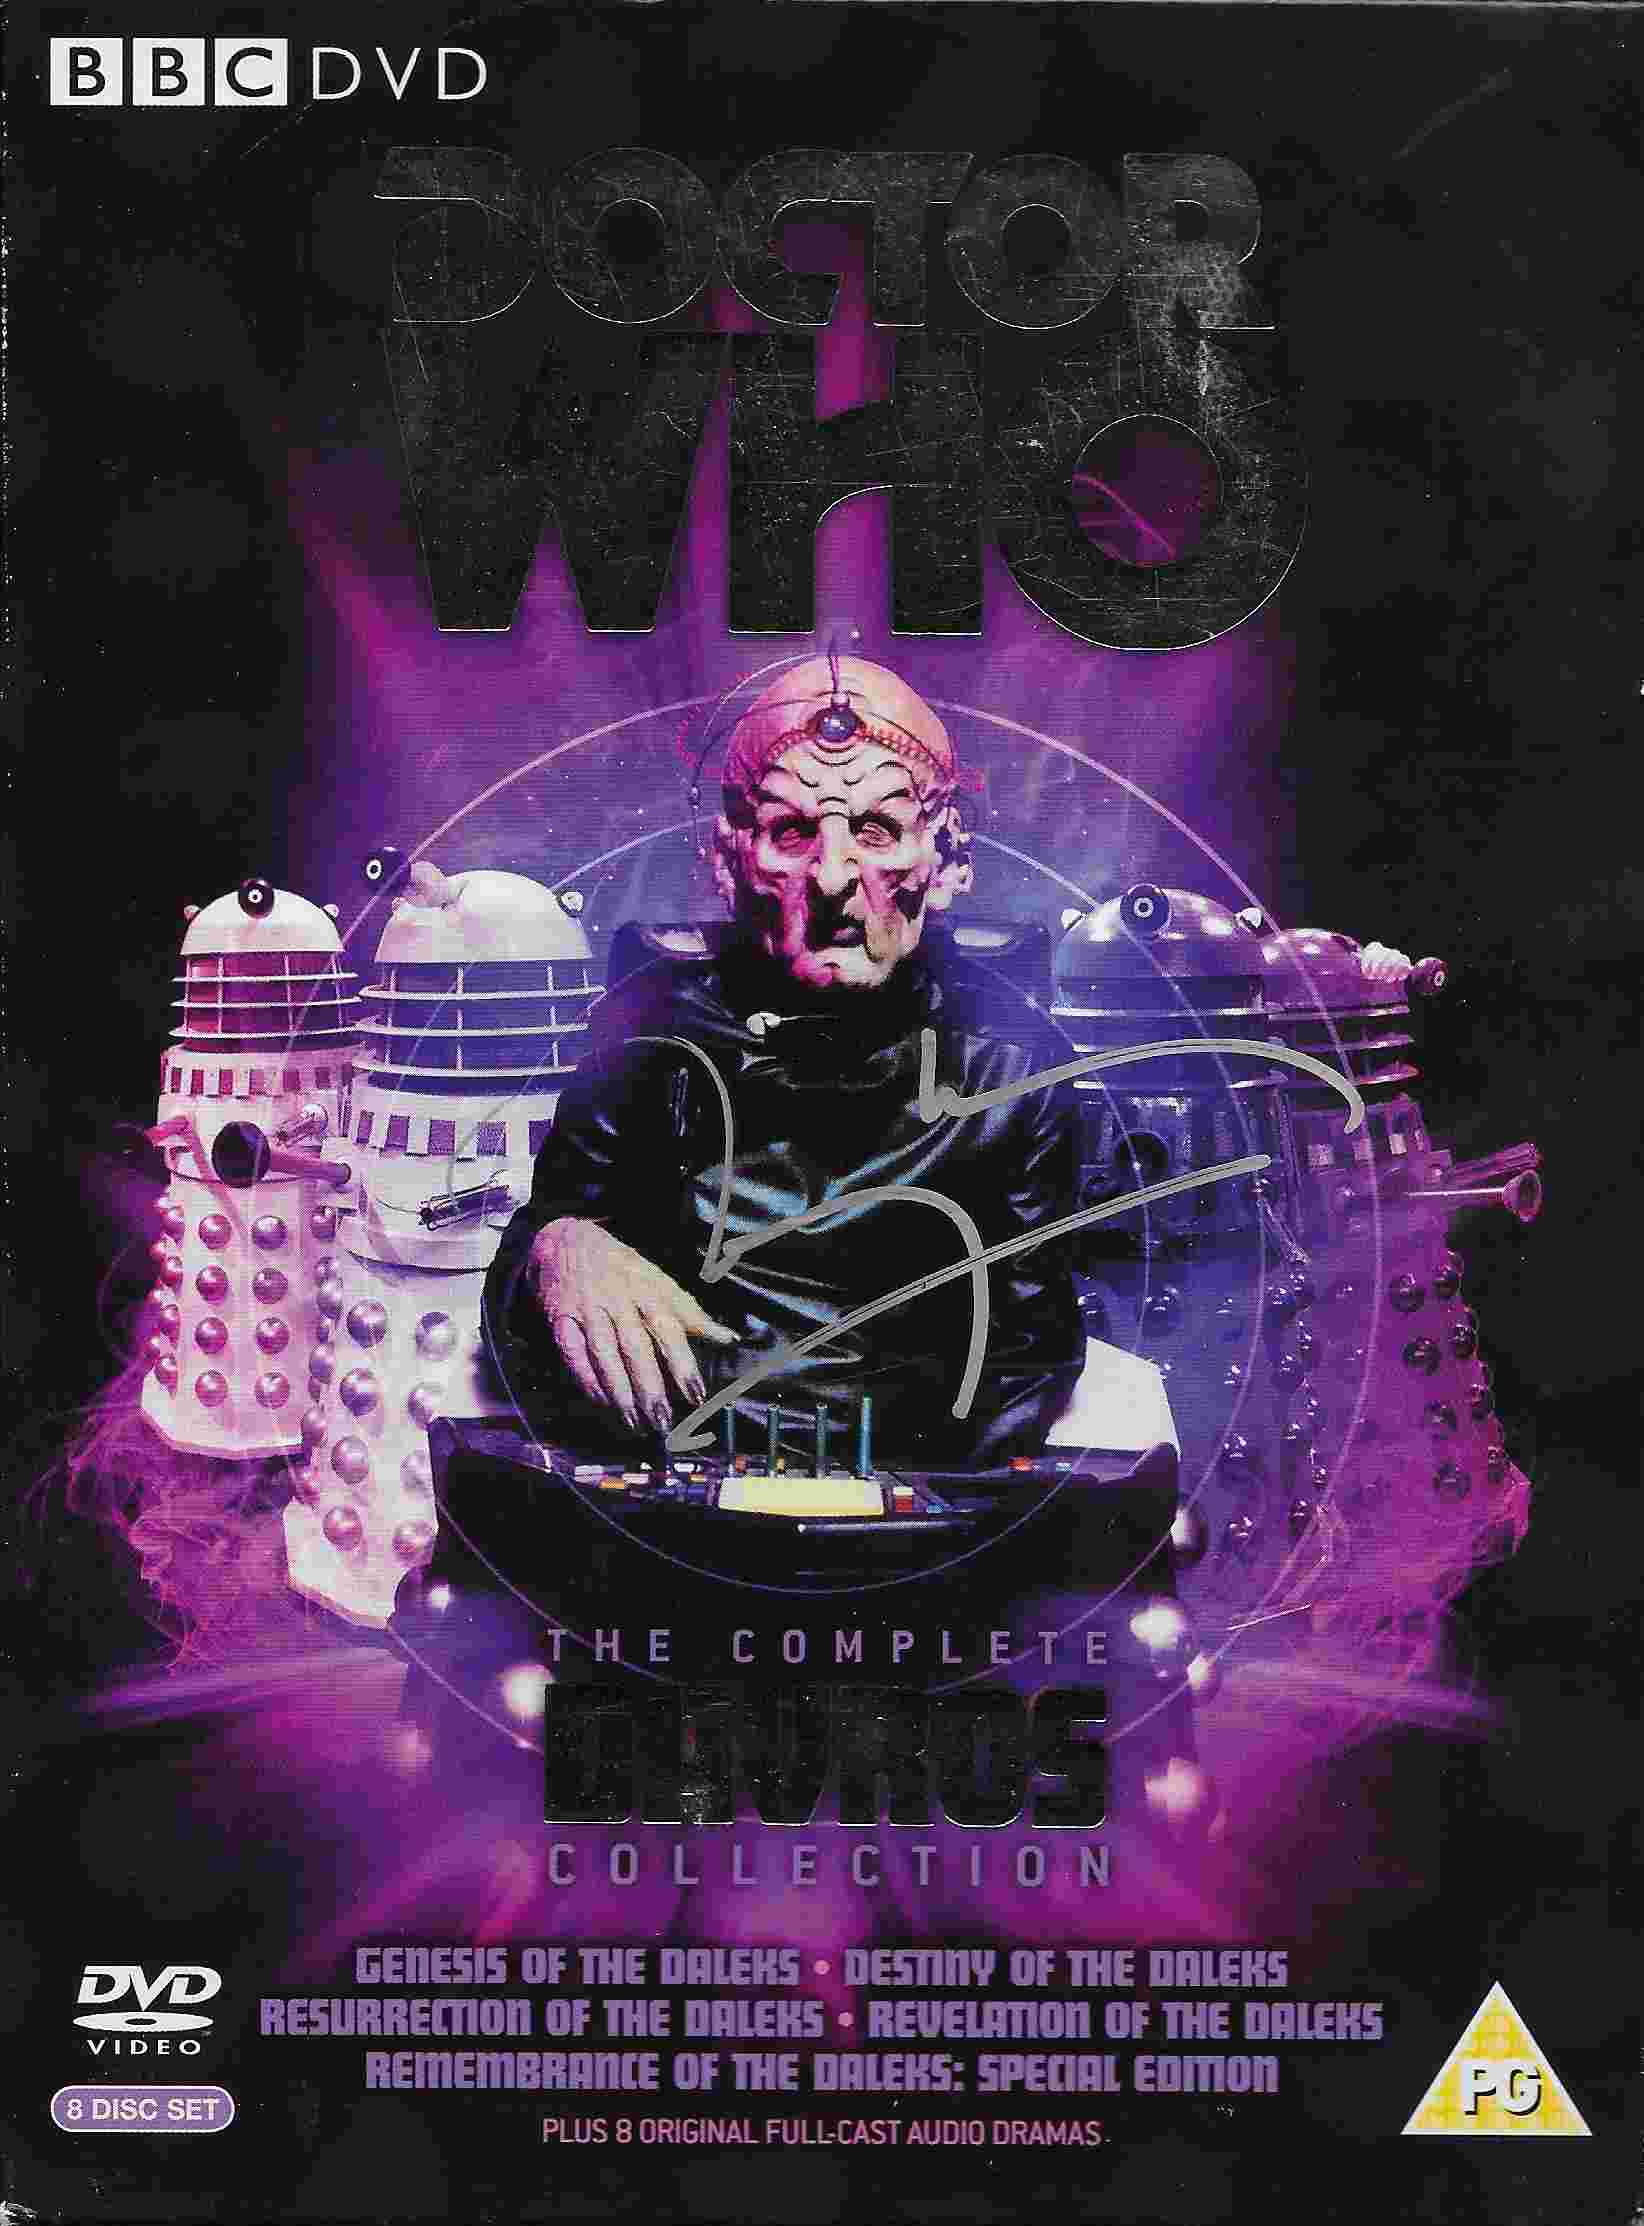 Picture of BBCDVD 2508 Doctor Who - The complete Davros collection by artist Various from the BBC records and Tapes library